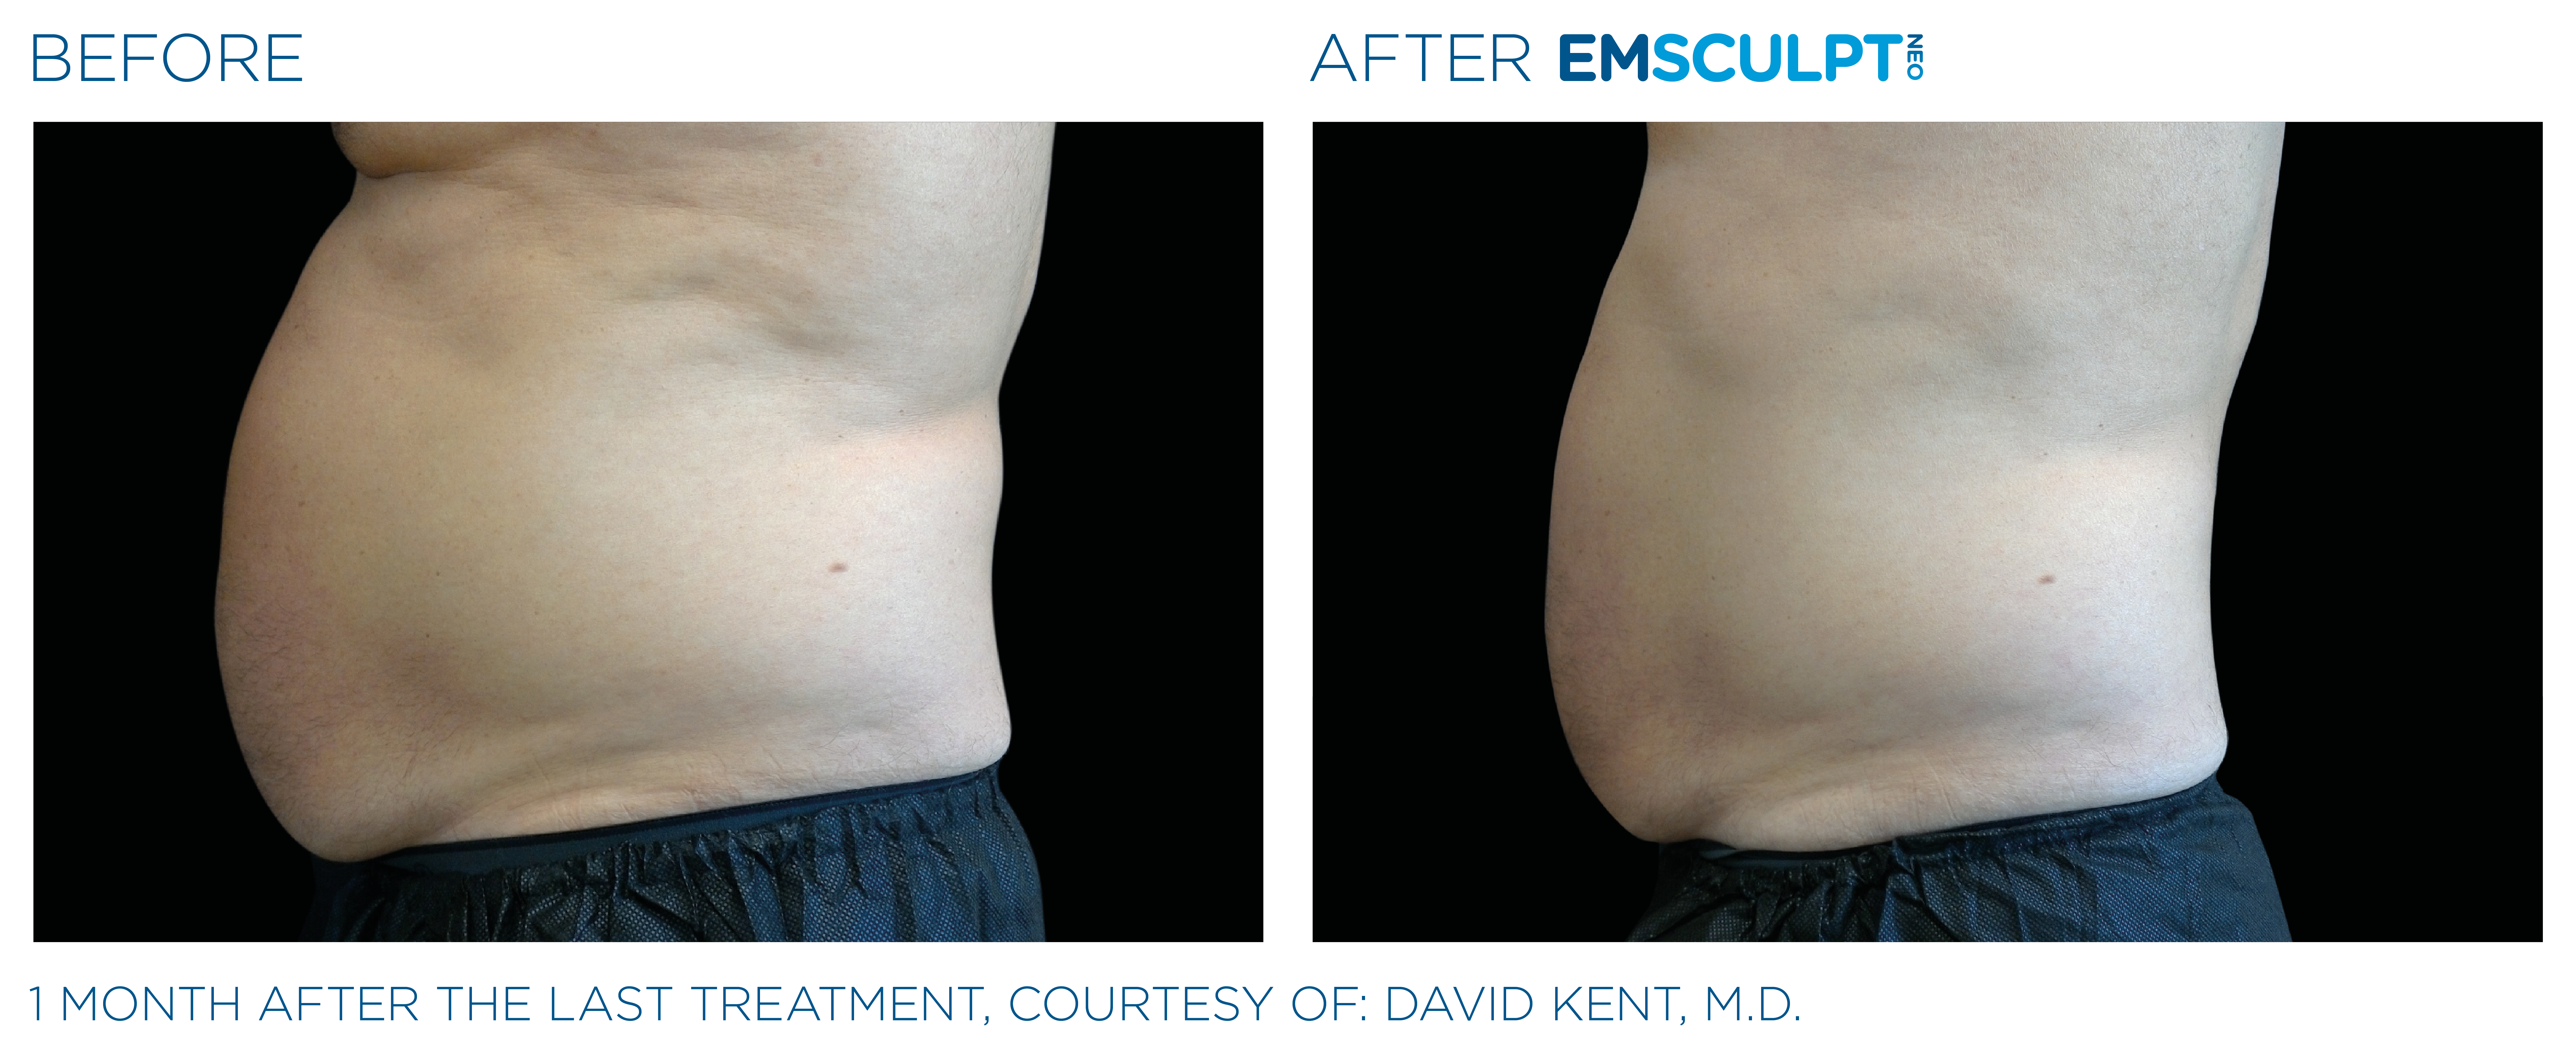 EMSCULPT NEO Before and After Pictures Abdomen